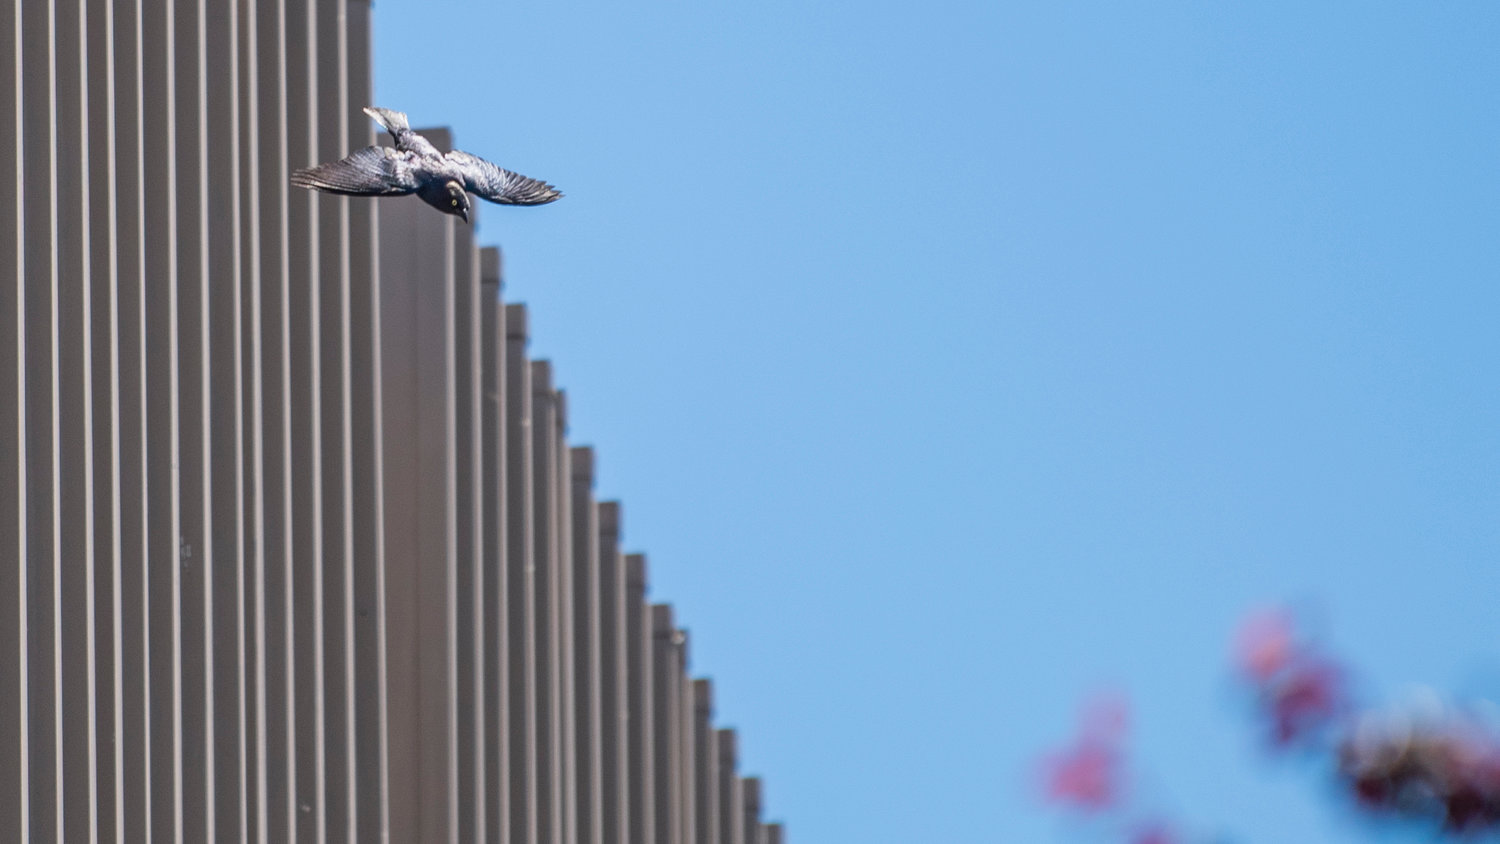 A Brewer’s blackbird dives from the roof of Chehalis City Hall towards pedestrians Thursday afternoon.